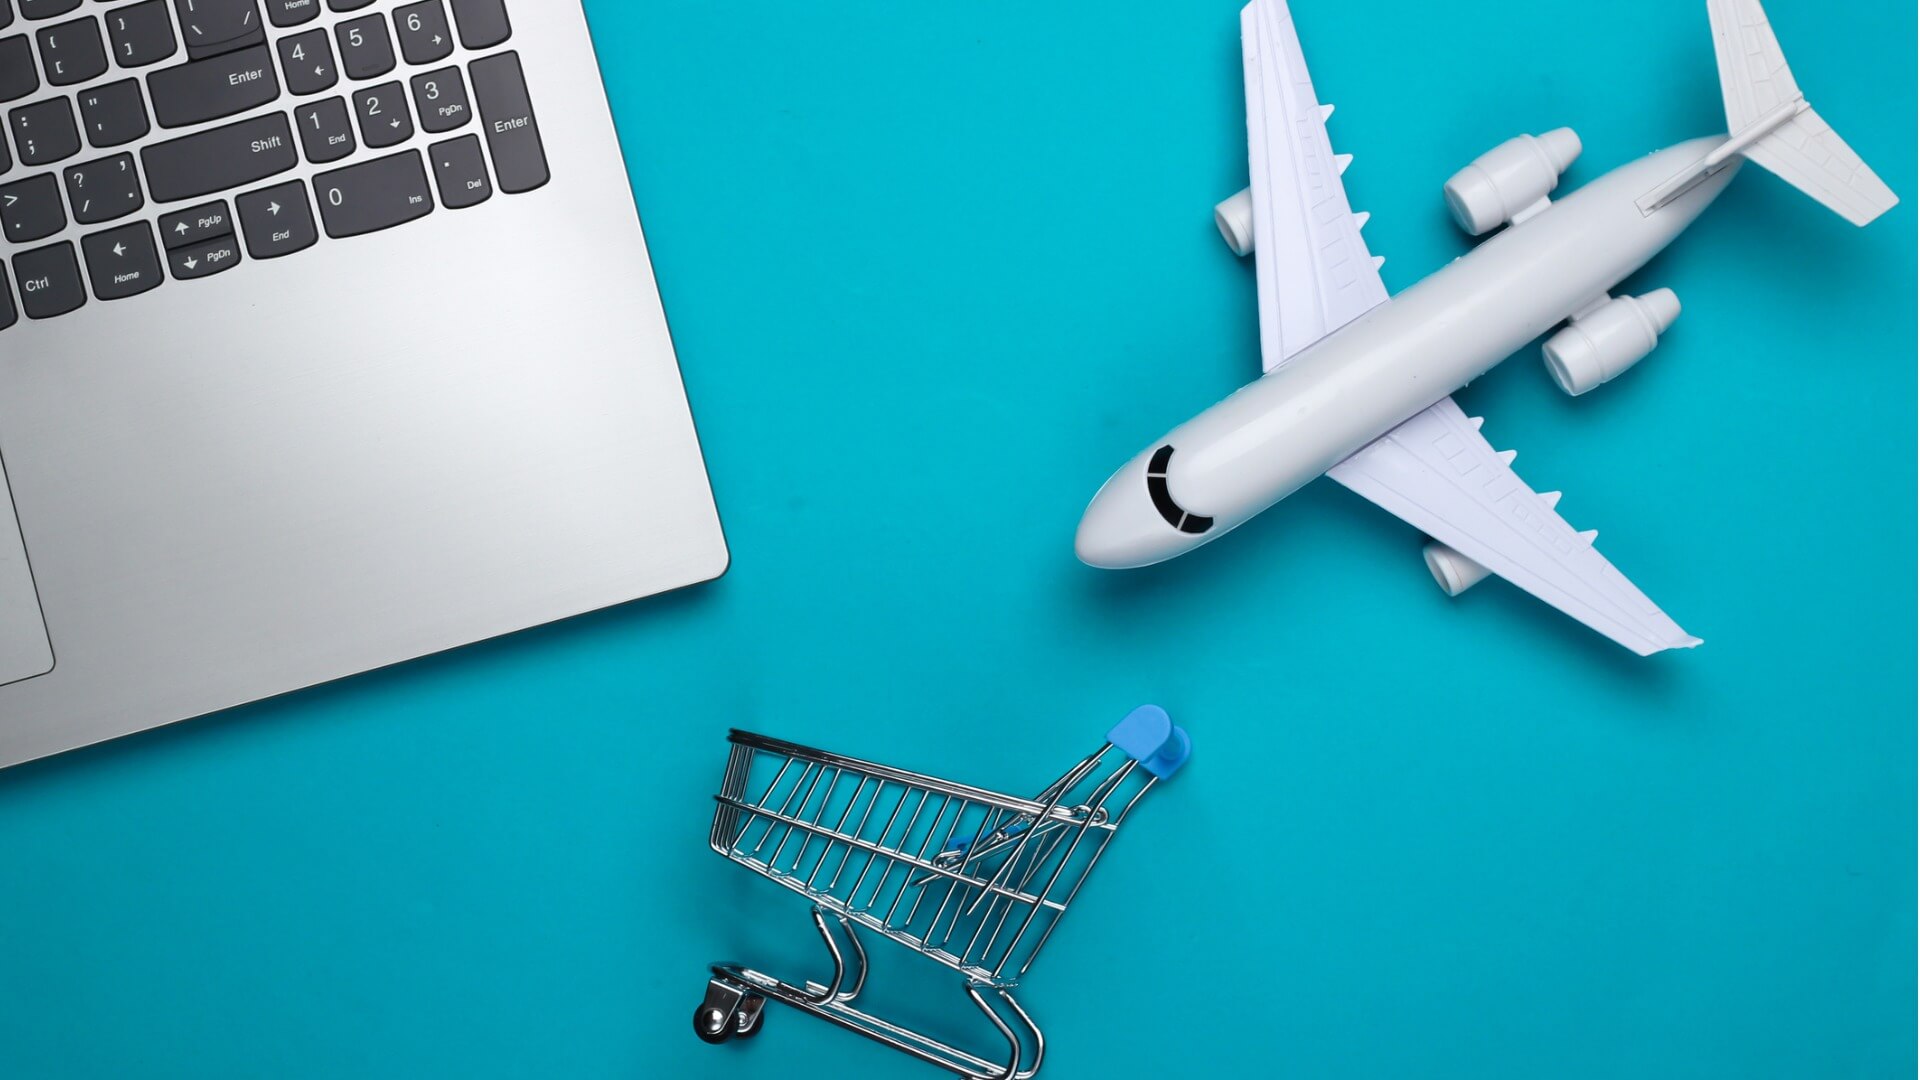 B2B digital marketplaces are taking off. Why isn’t aviation along for the ride?